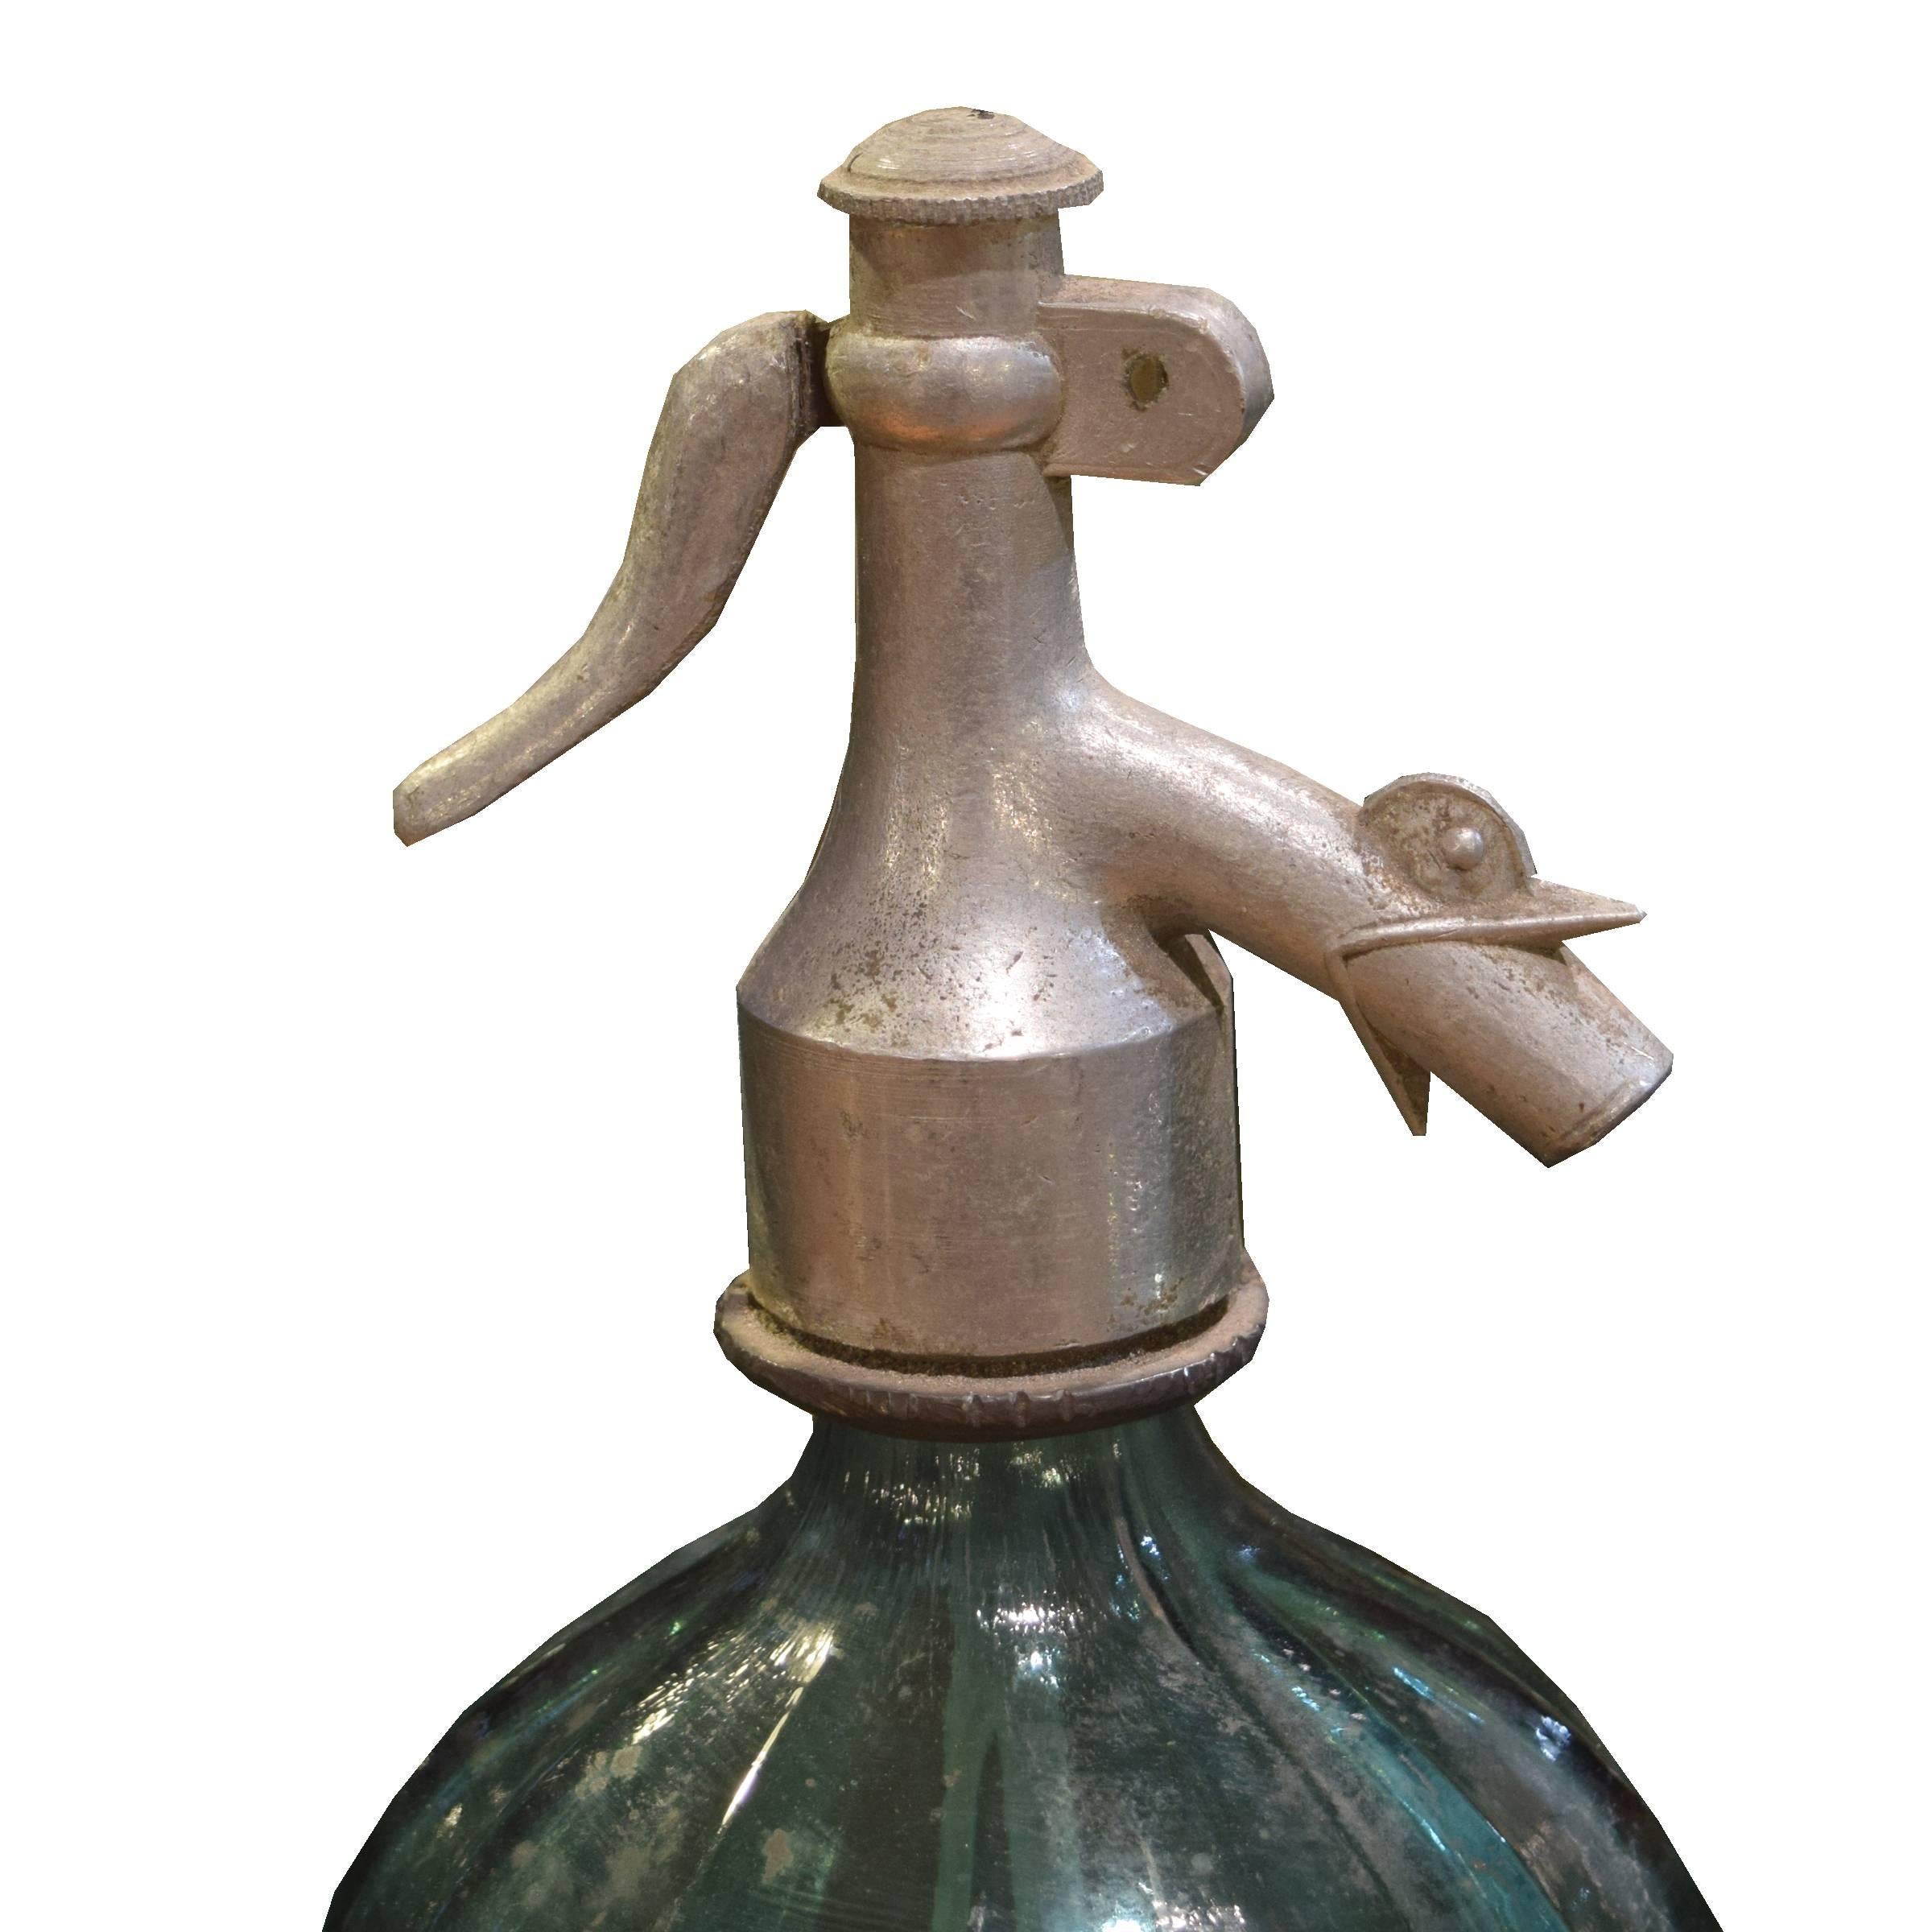 20th Century Italian Seltzer Bottle with Rooster Head Spout